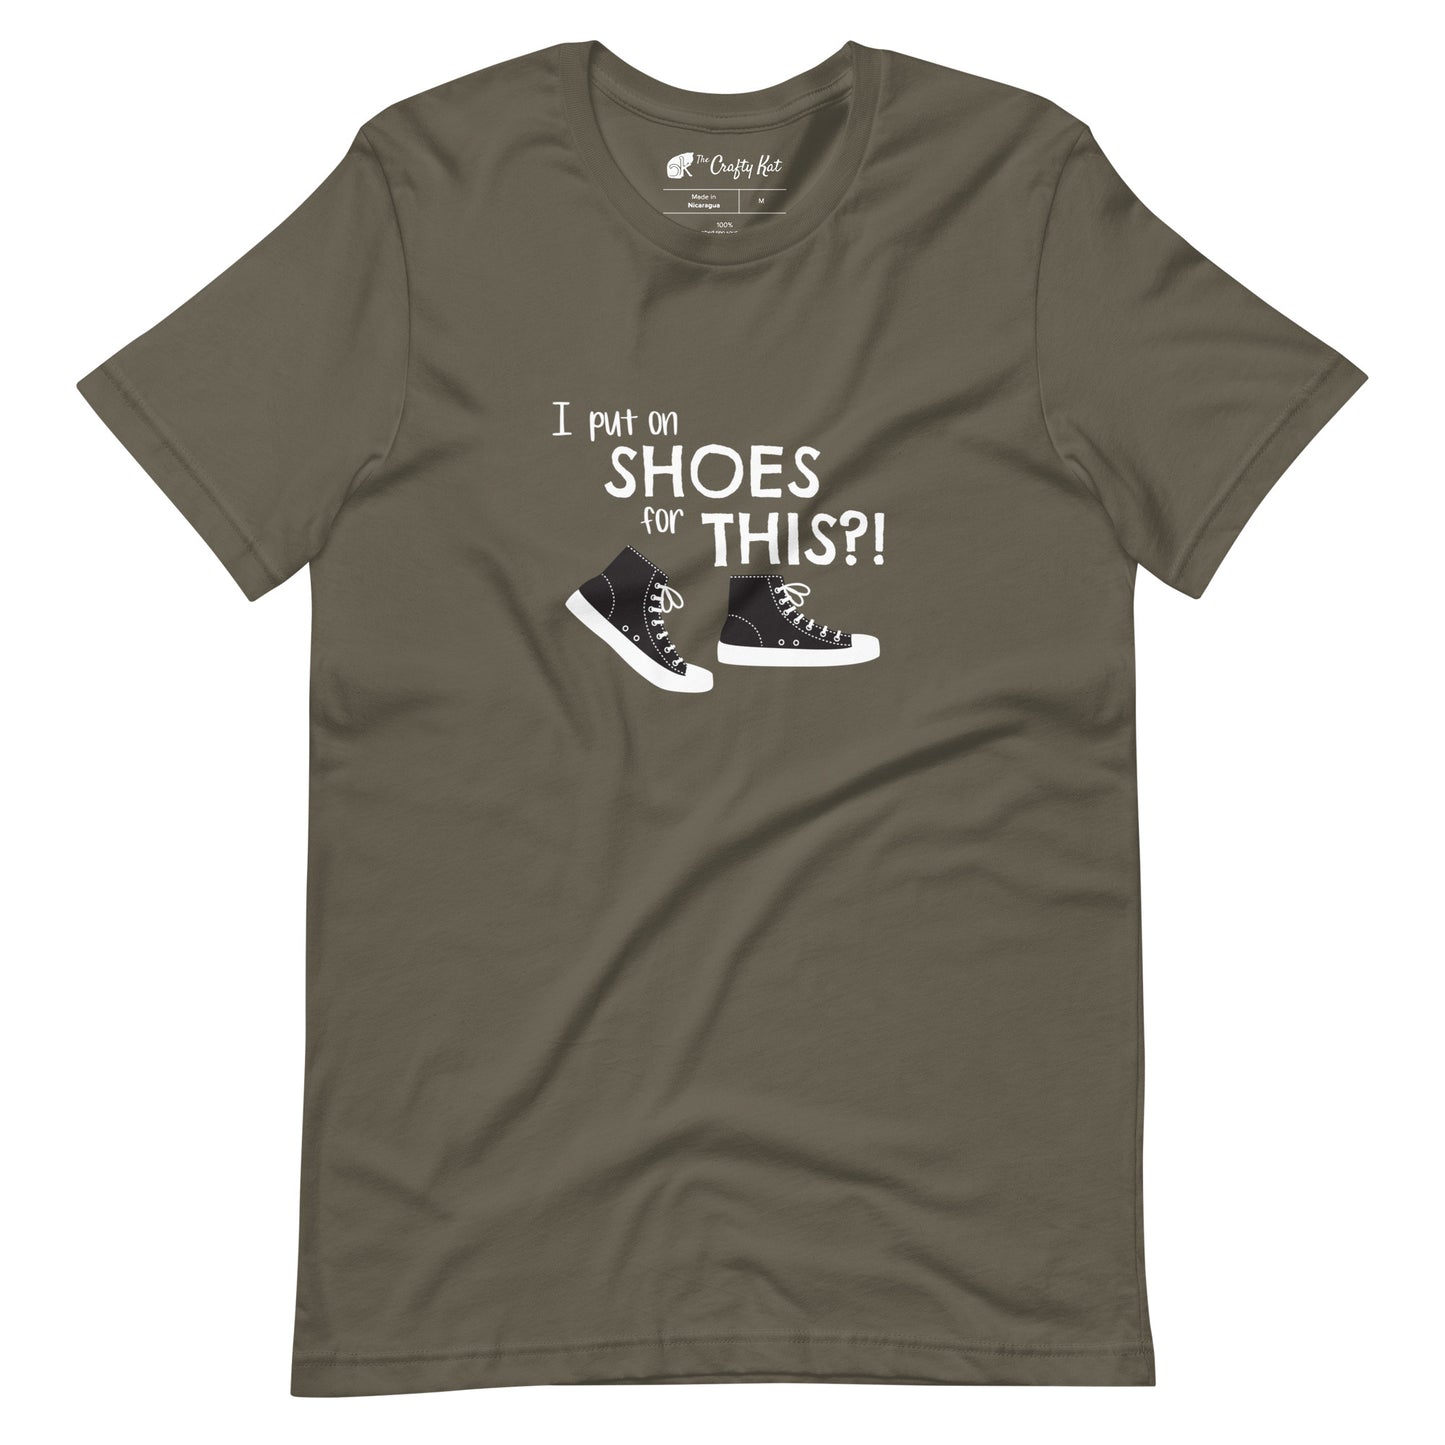 Army (olive tan) t-shirt with graphic of black and white canvas "chuck" sneakers and text: "I put on SHOES for THIS?!"